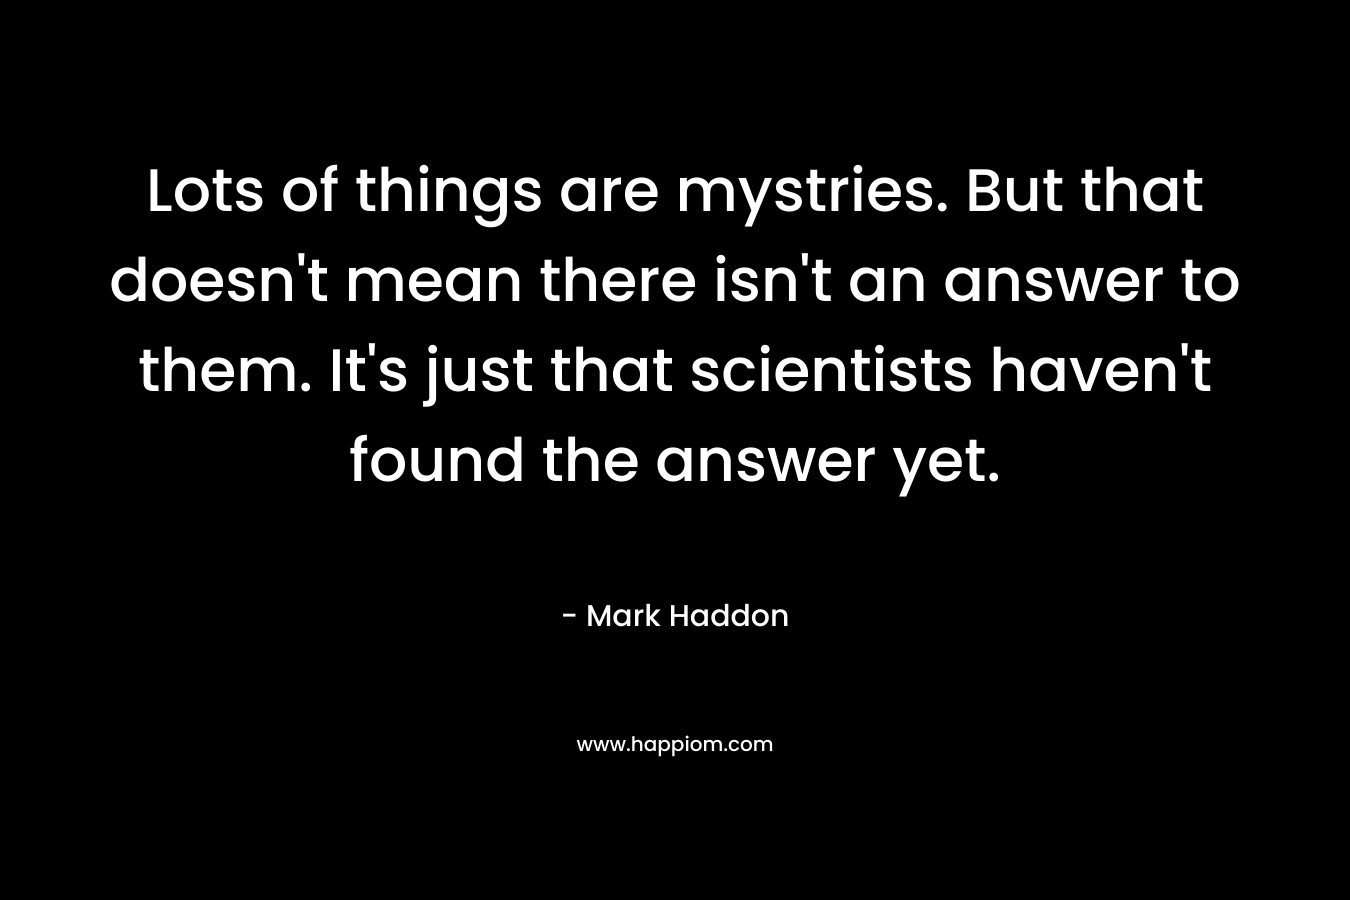 Lots of things are mystries. But that doesn’t mean there isn’t an answer to them. It’s just that scientists haven’t found the answer yet. – Mark Haddon